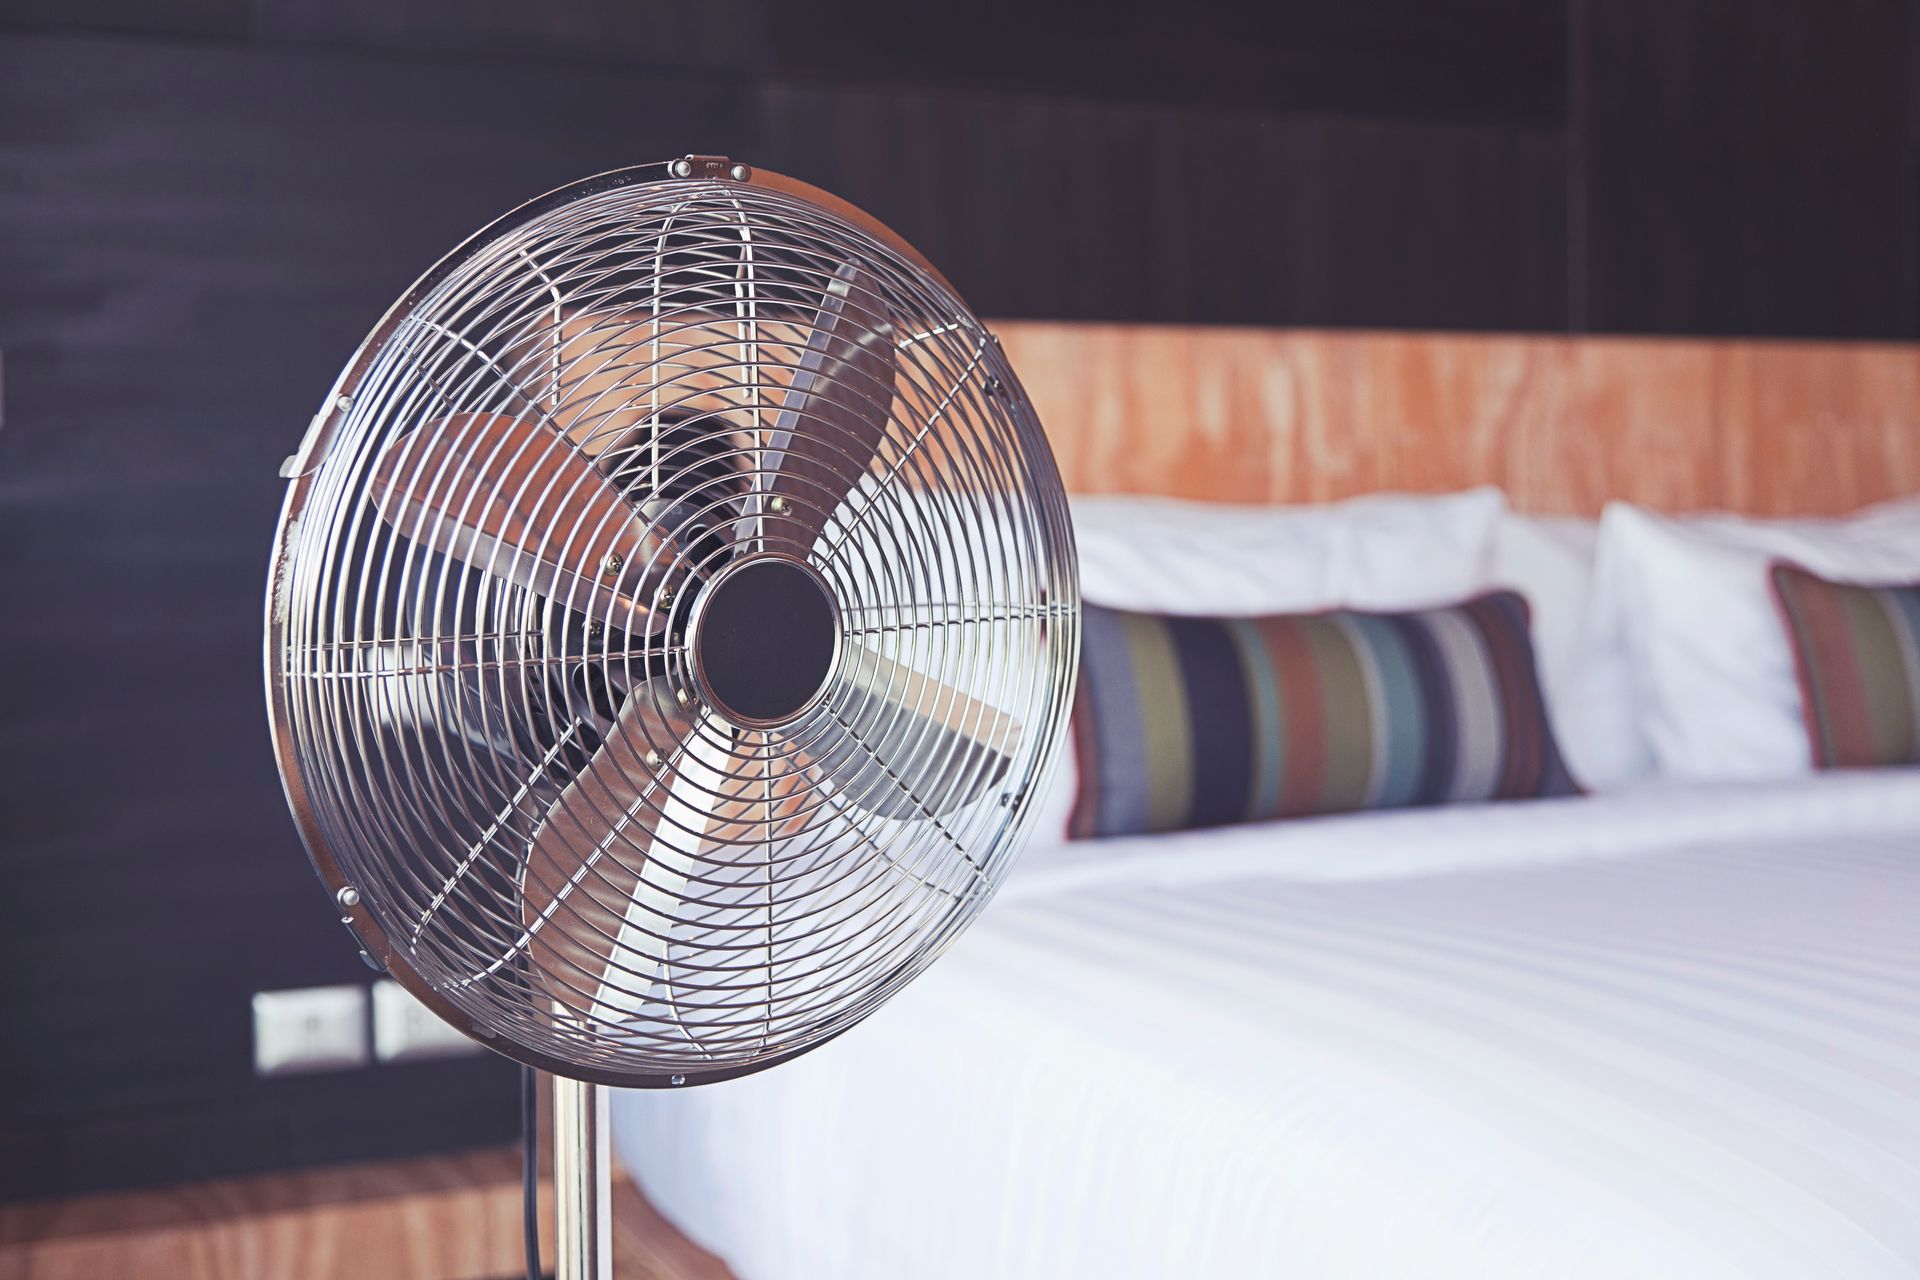 A fan is sitting in front of a bed in a bedroom.